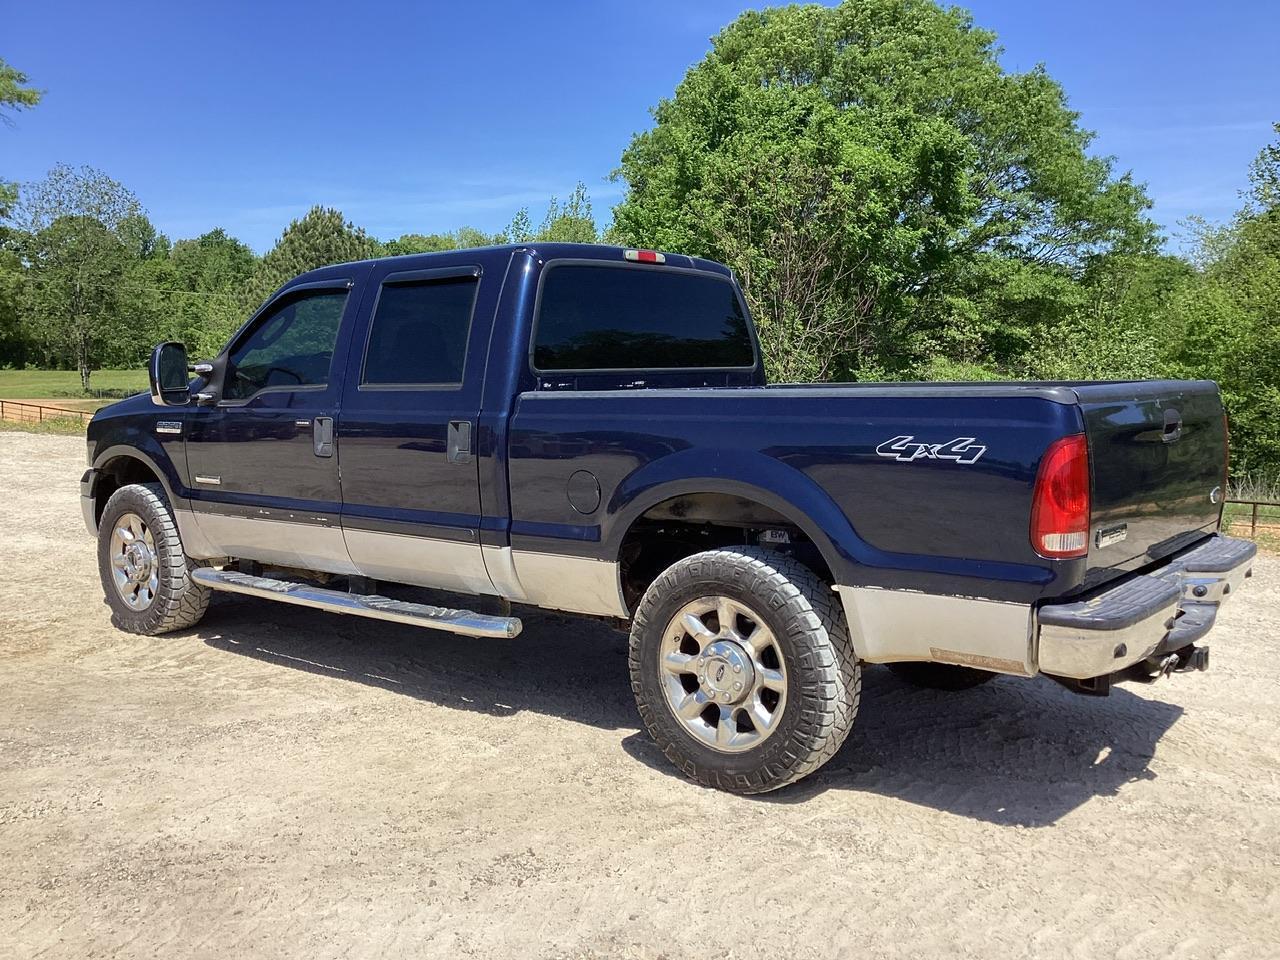 2006 Ford F250 Pick Up